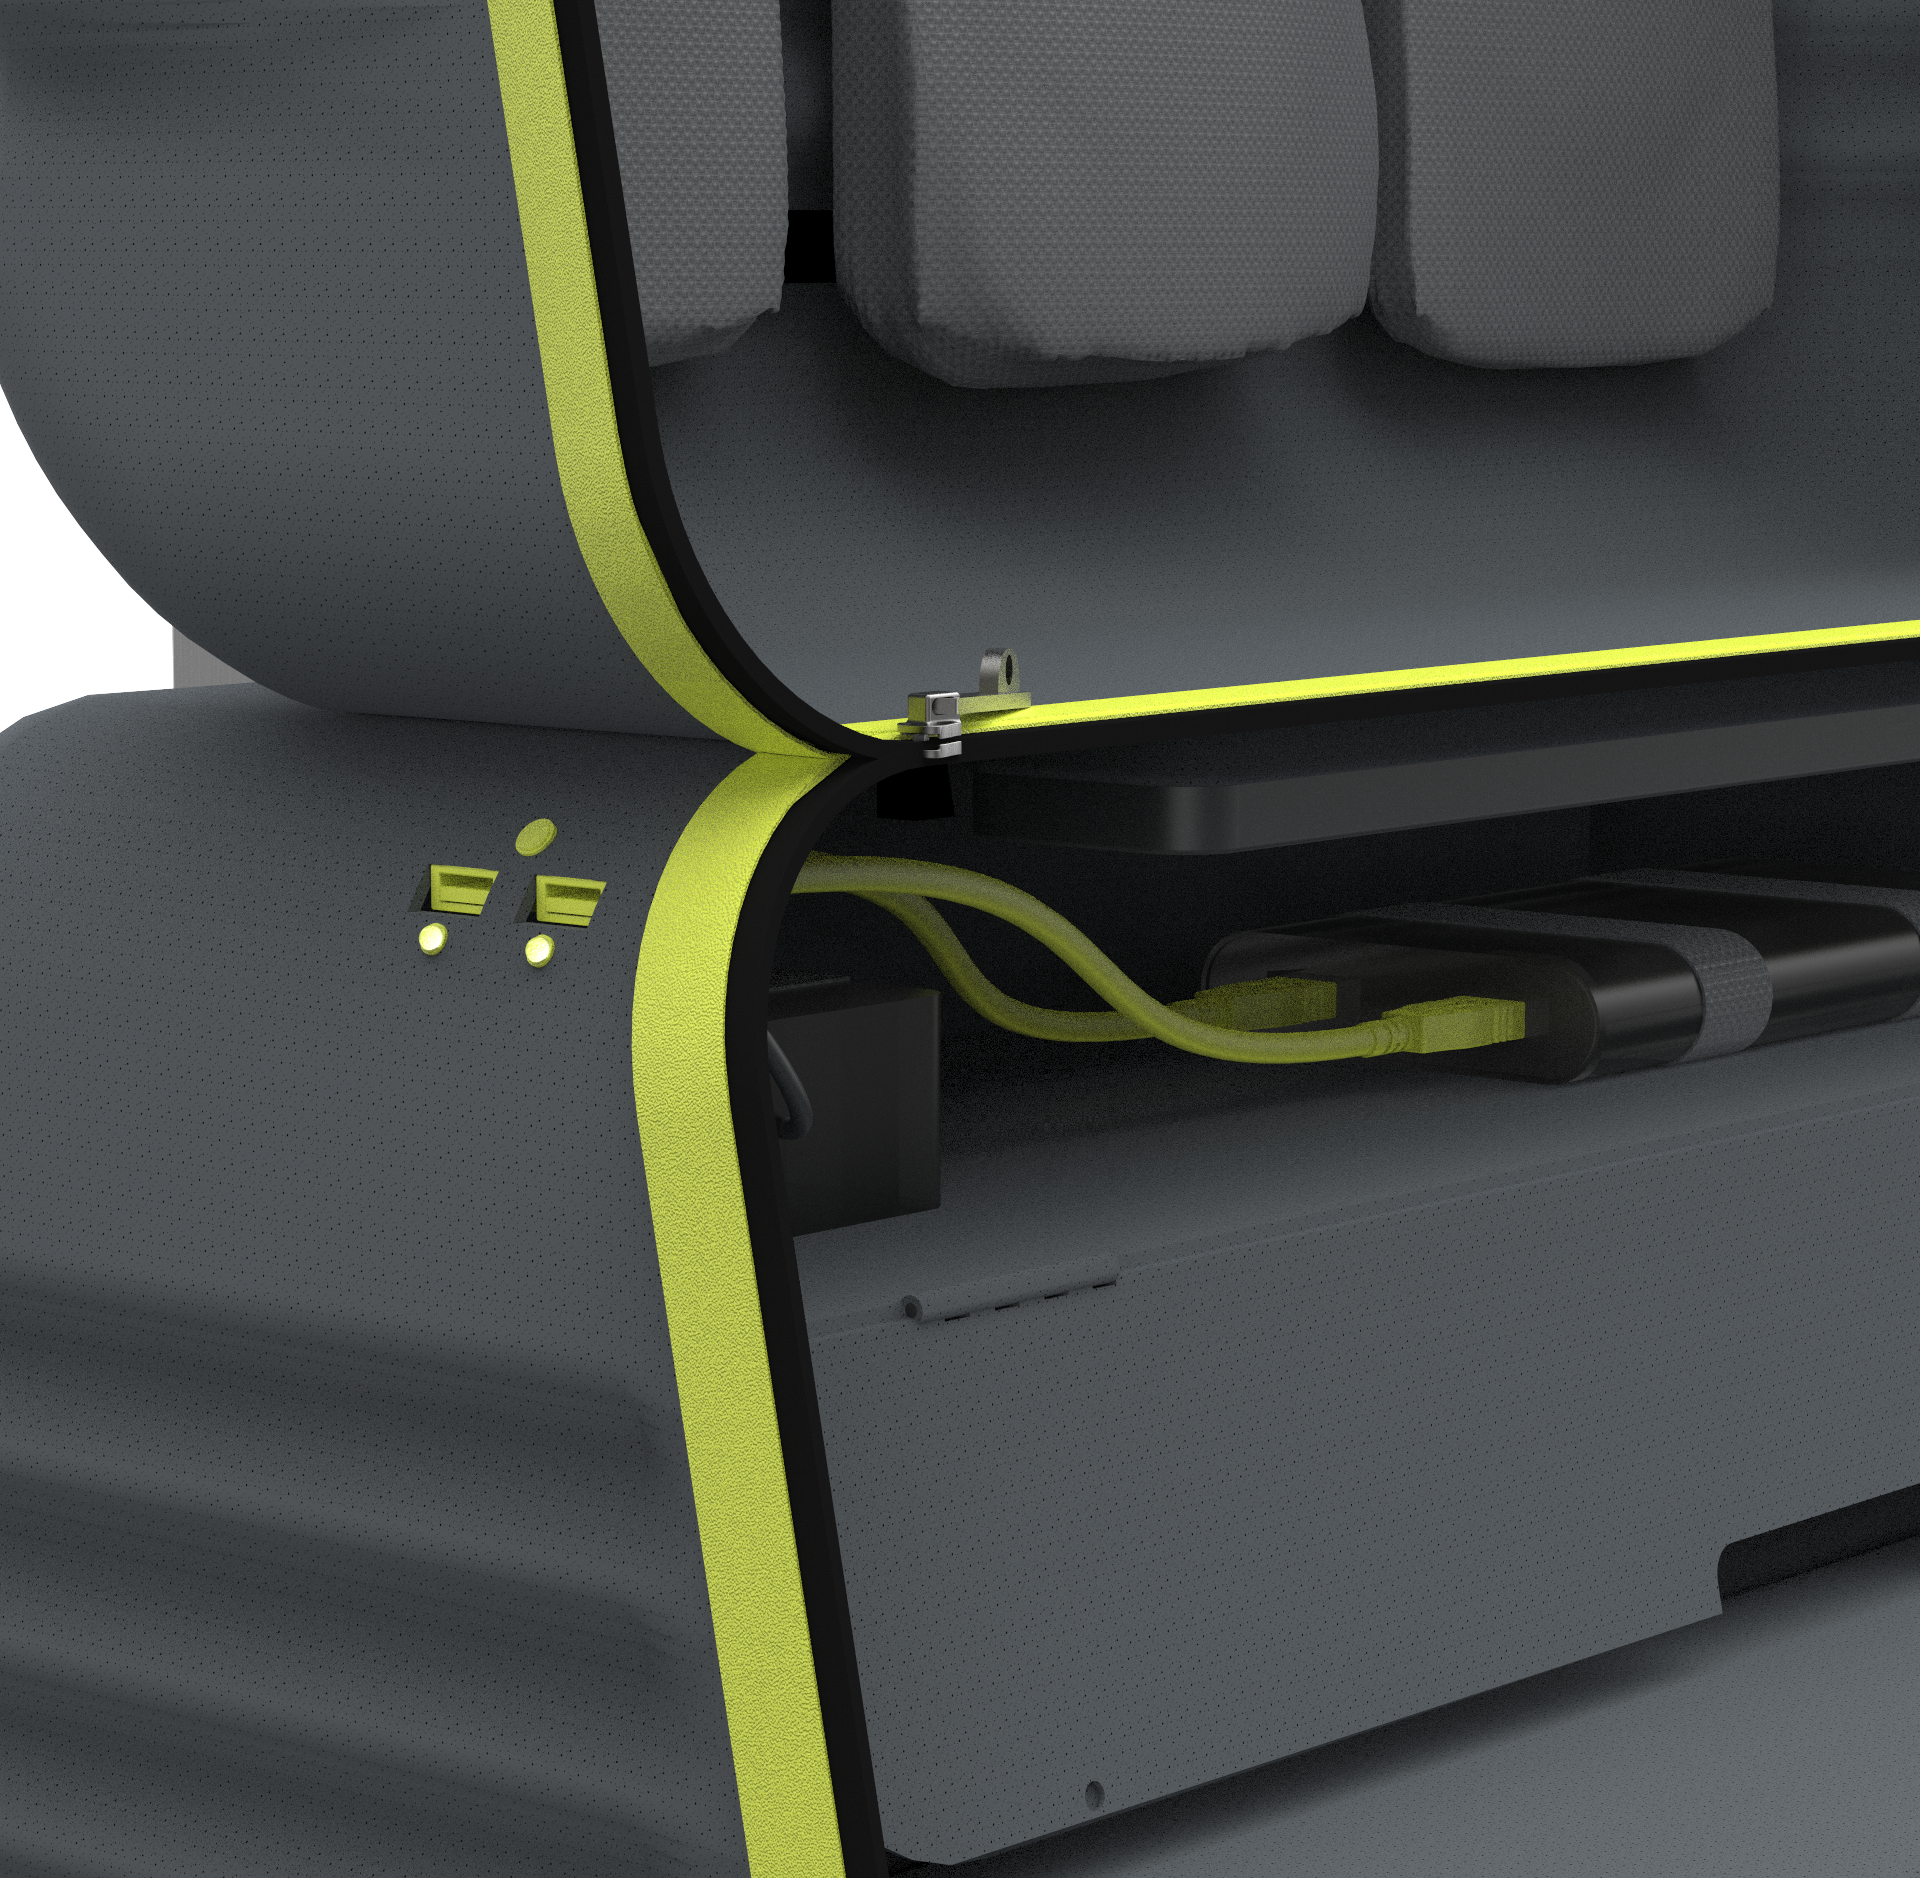 USB sockets and interior of the batteries compartment